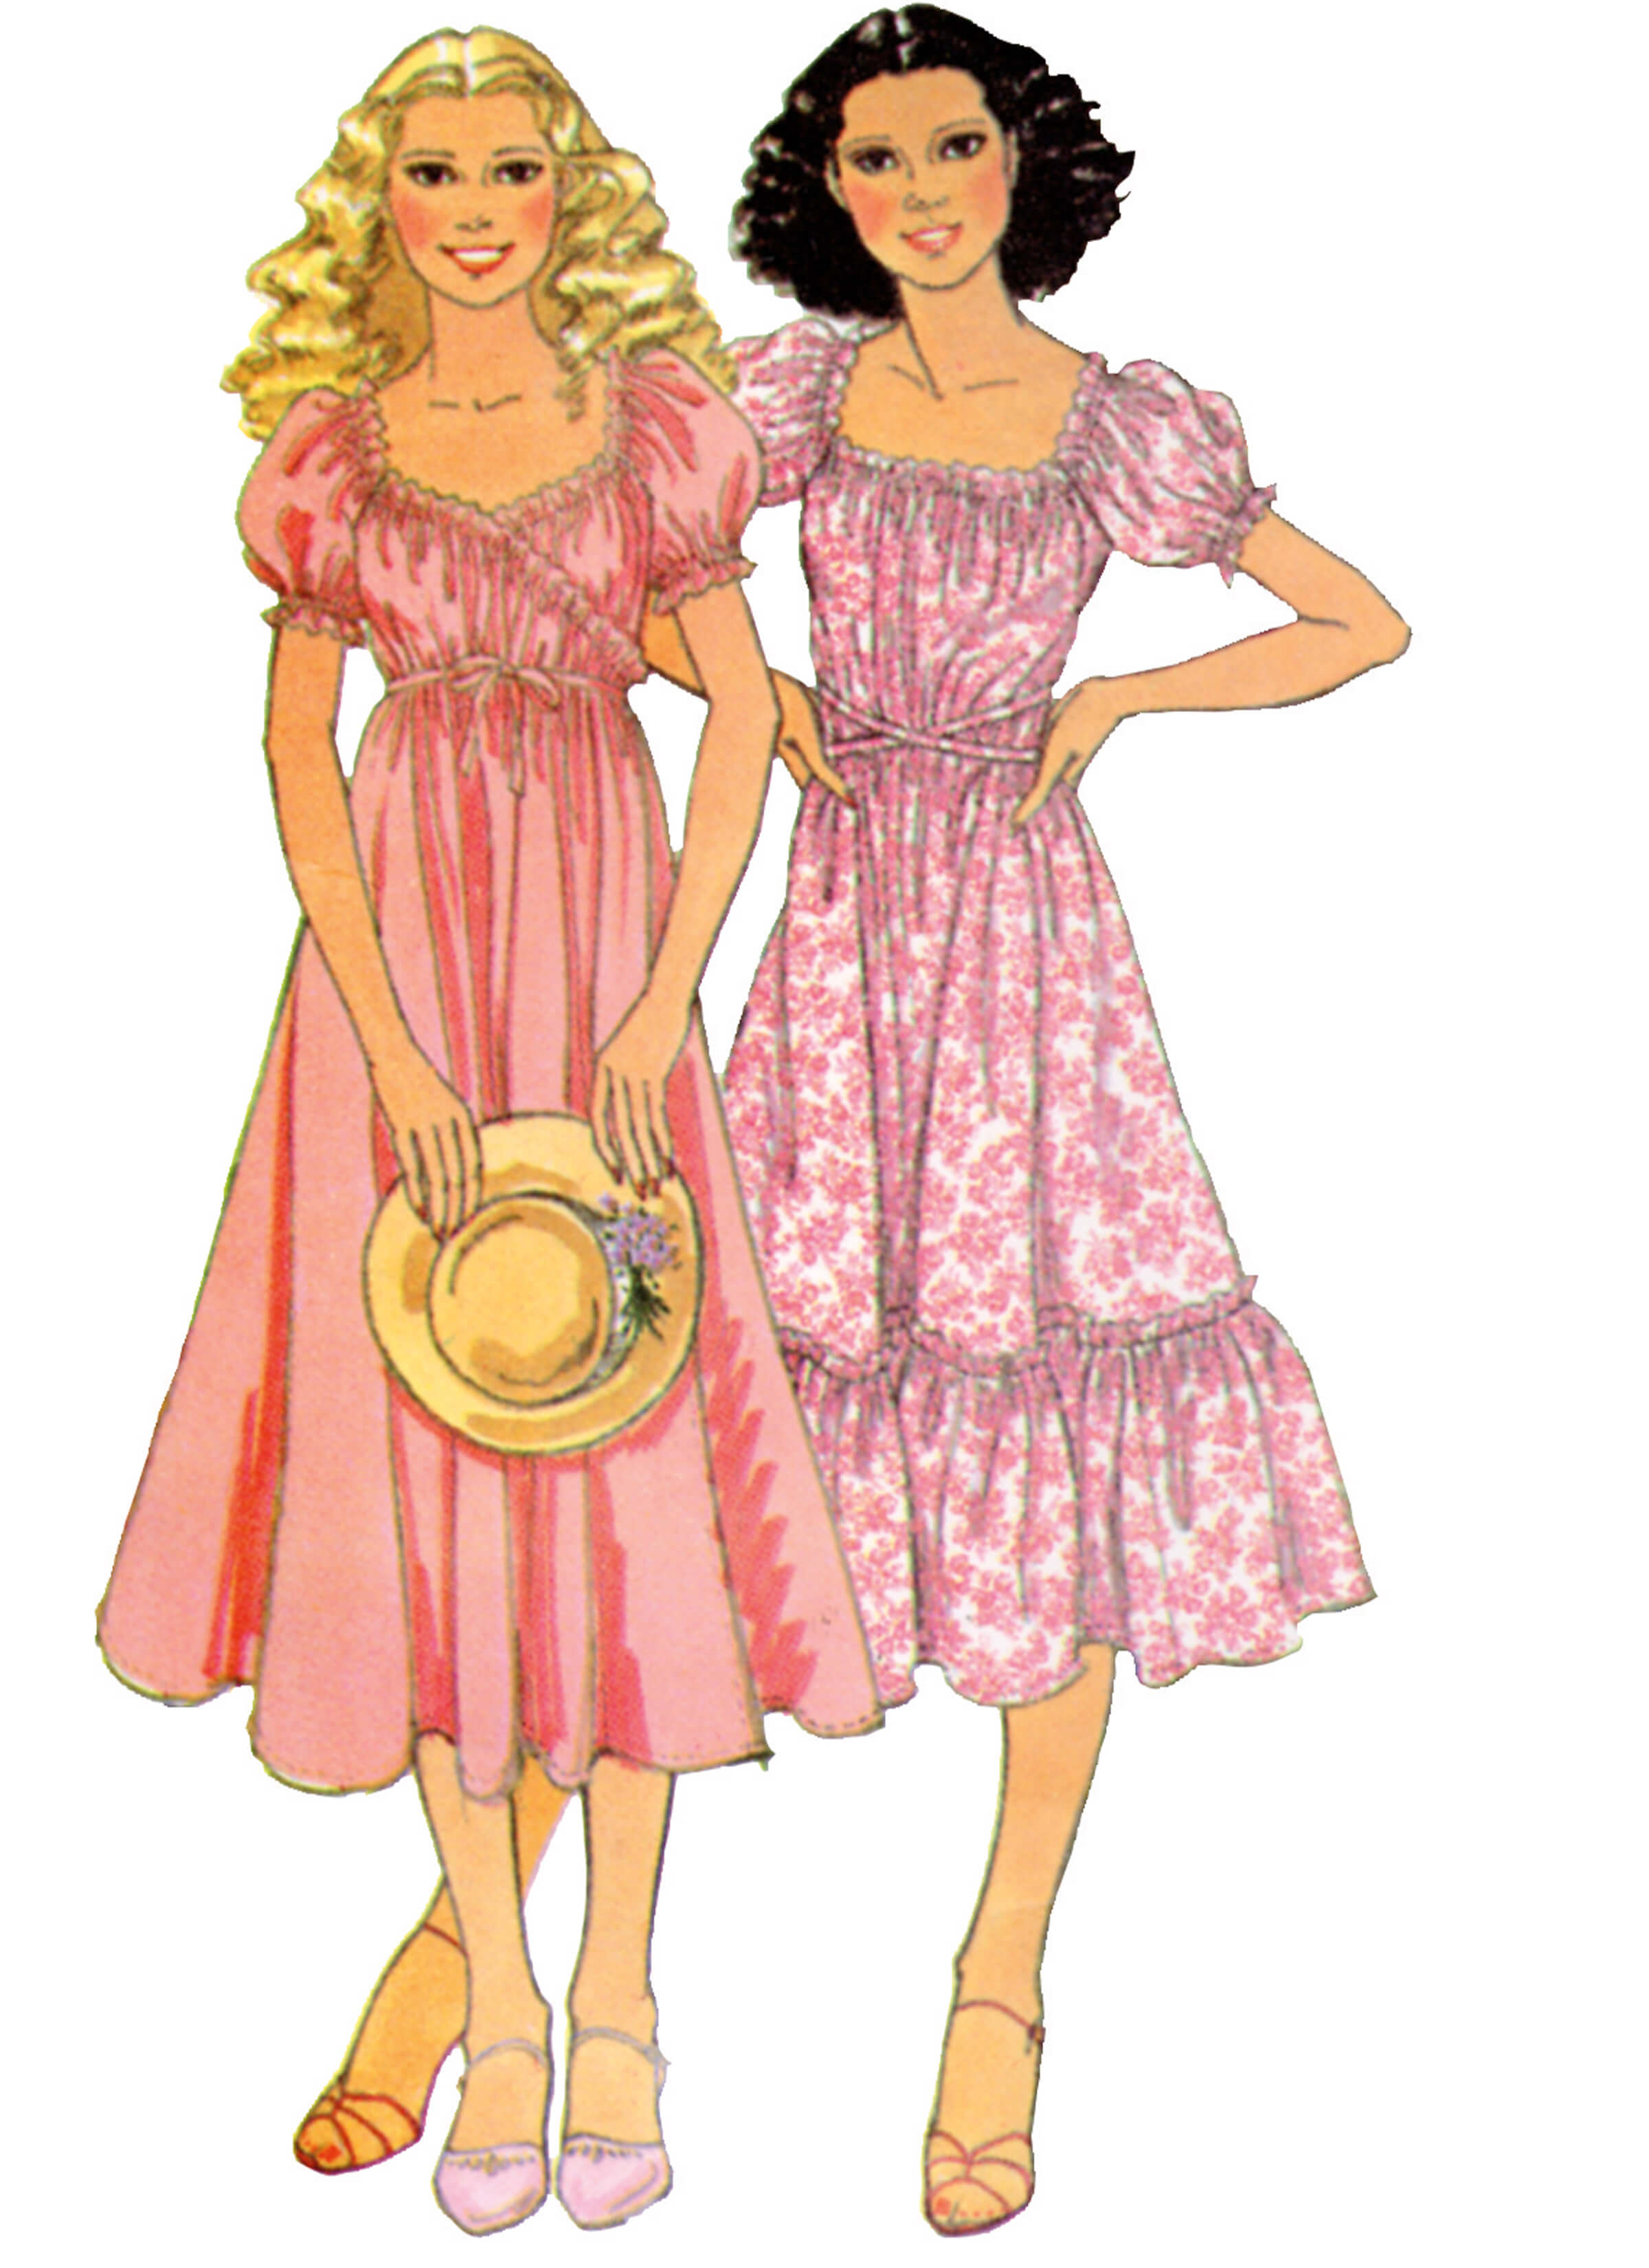 McCall's Sewing Pattern M8358 Misses' Vintage Wrap Dress by Laura Ashley